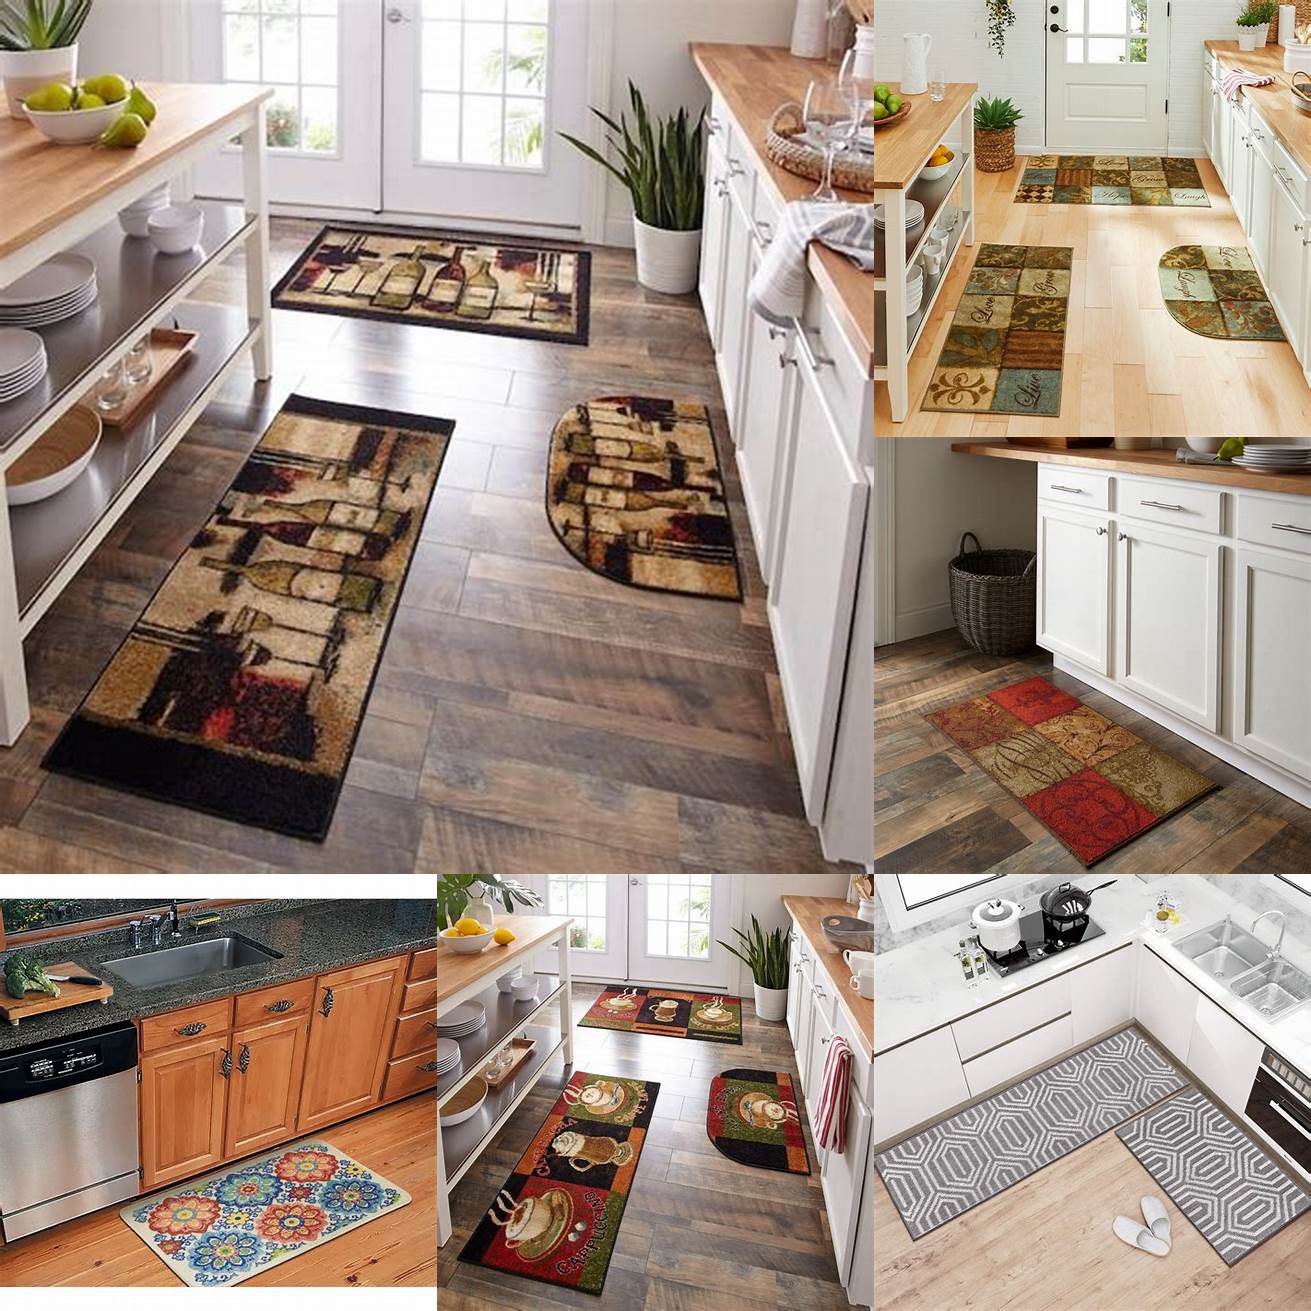 4 Adds Style Kitchen mats come in different colors and designs adding a touch of style to your kitchen